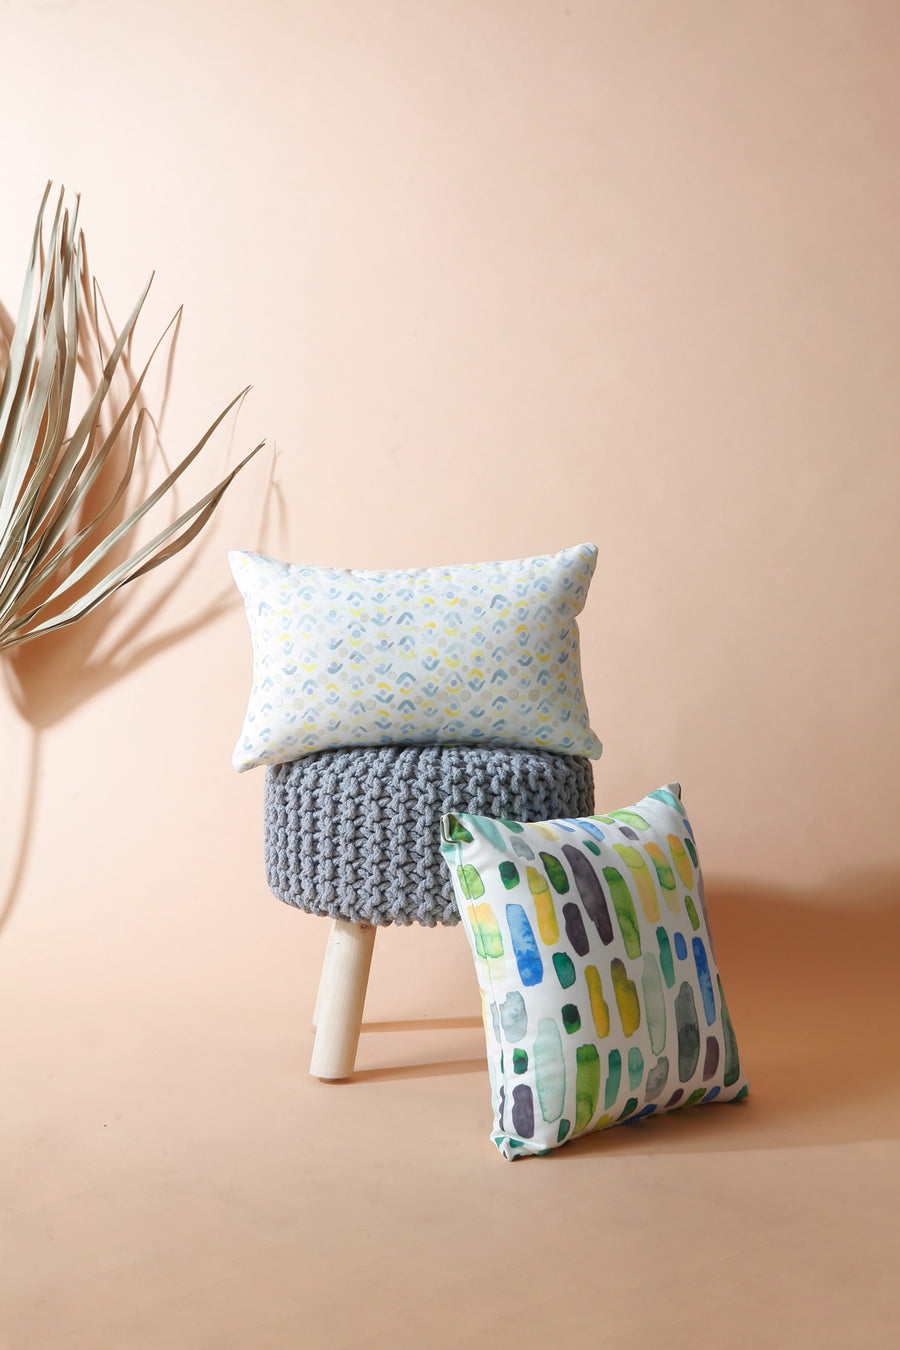 Lemon Rere Printed Cushion Cover - Water and Sun Resistant